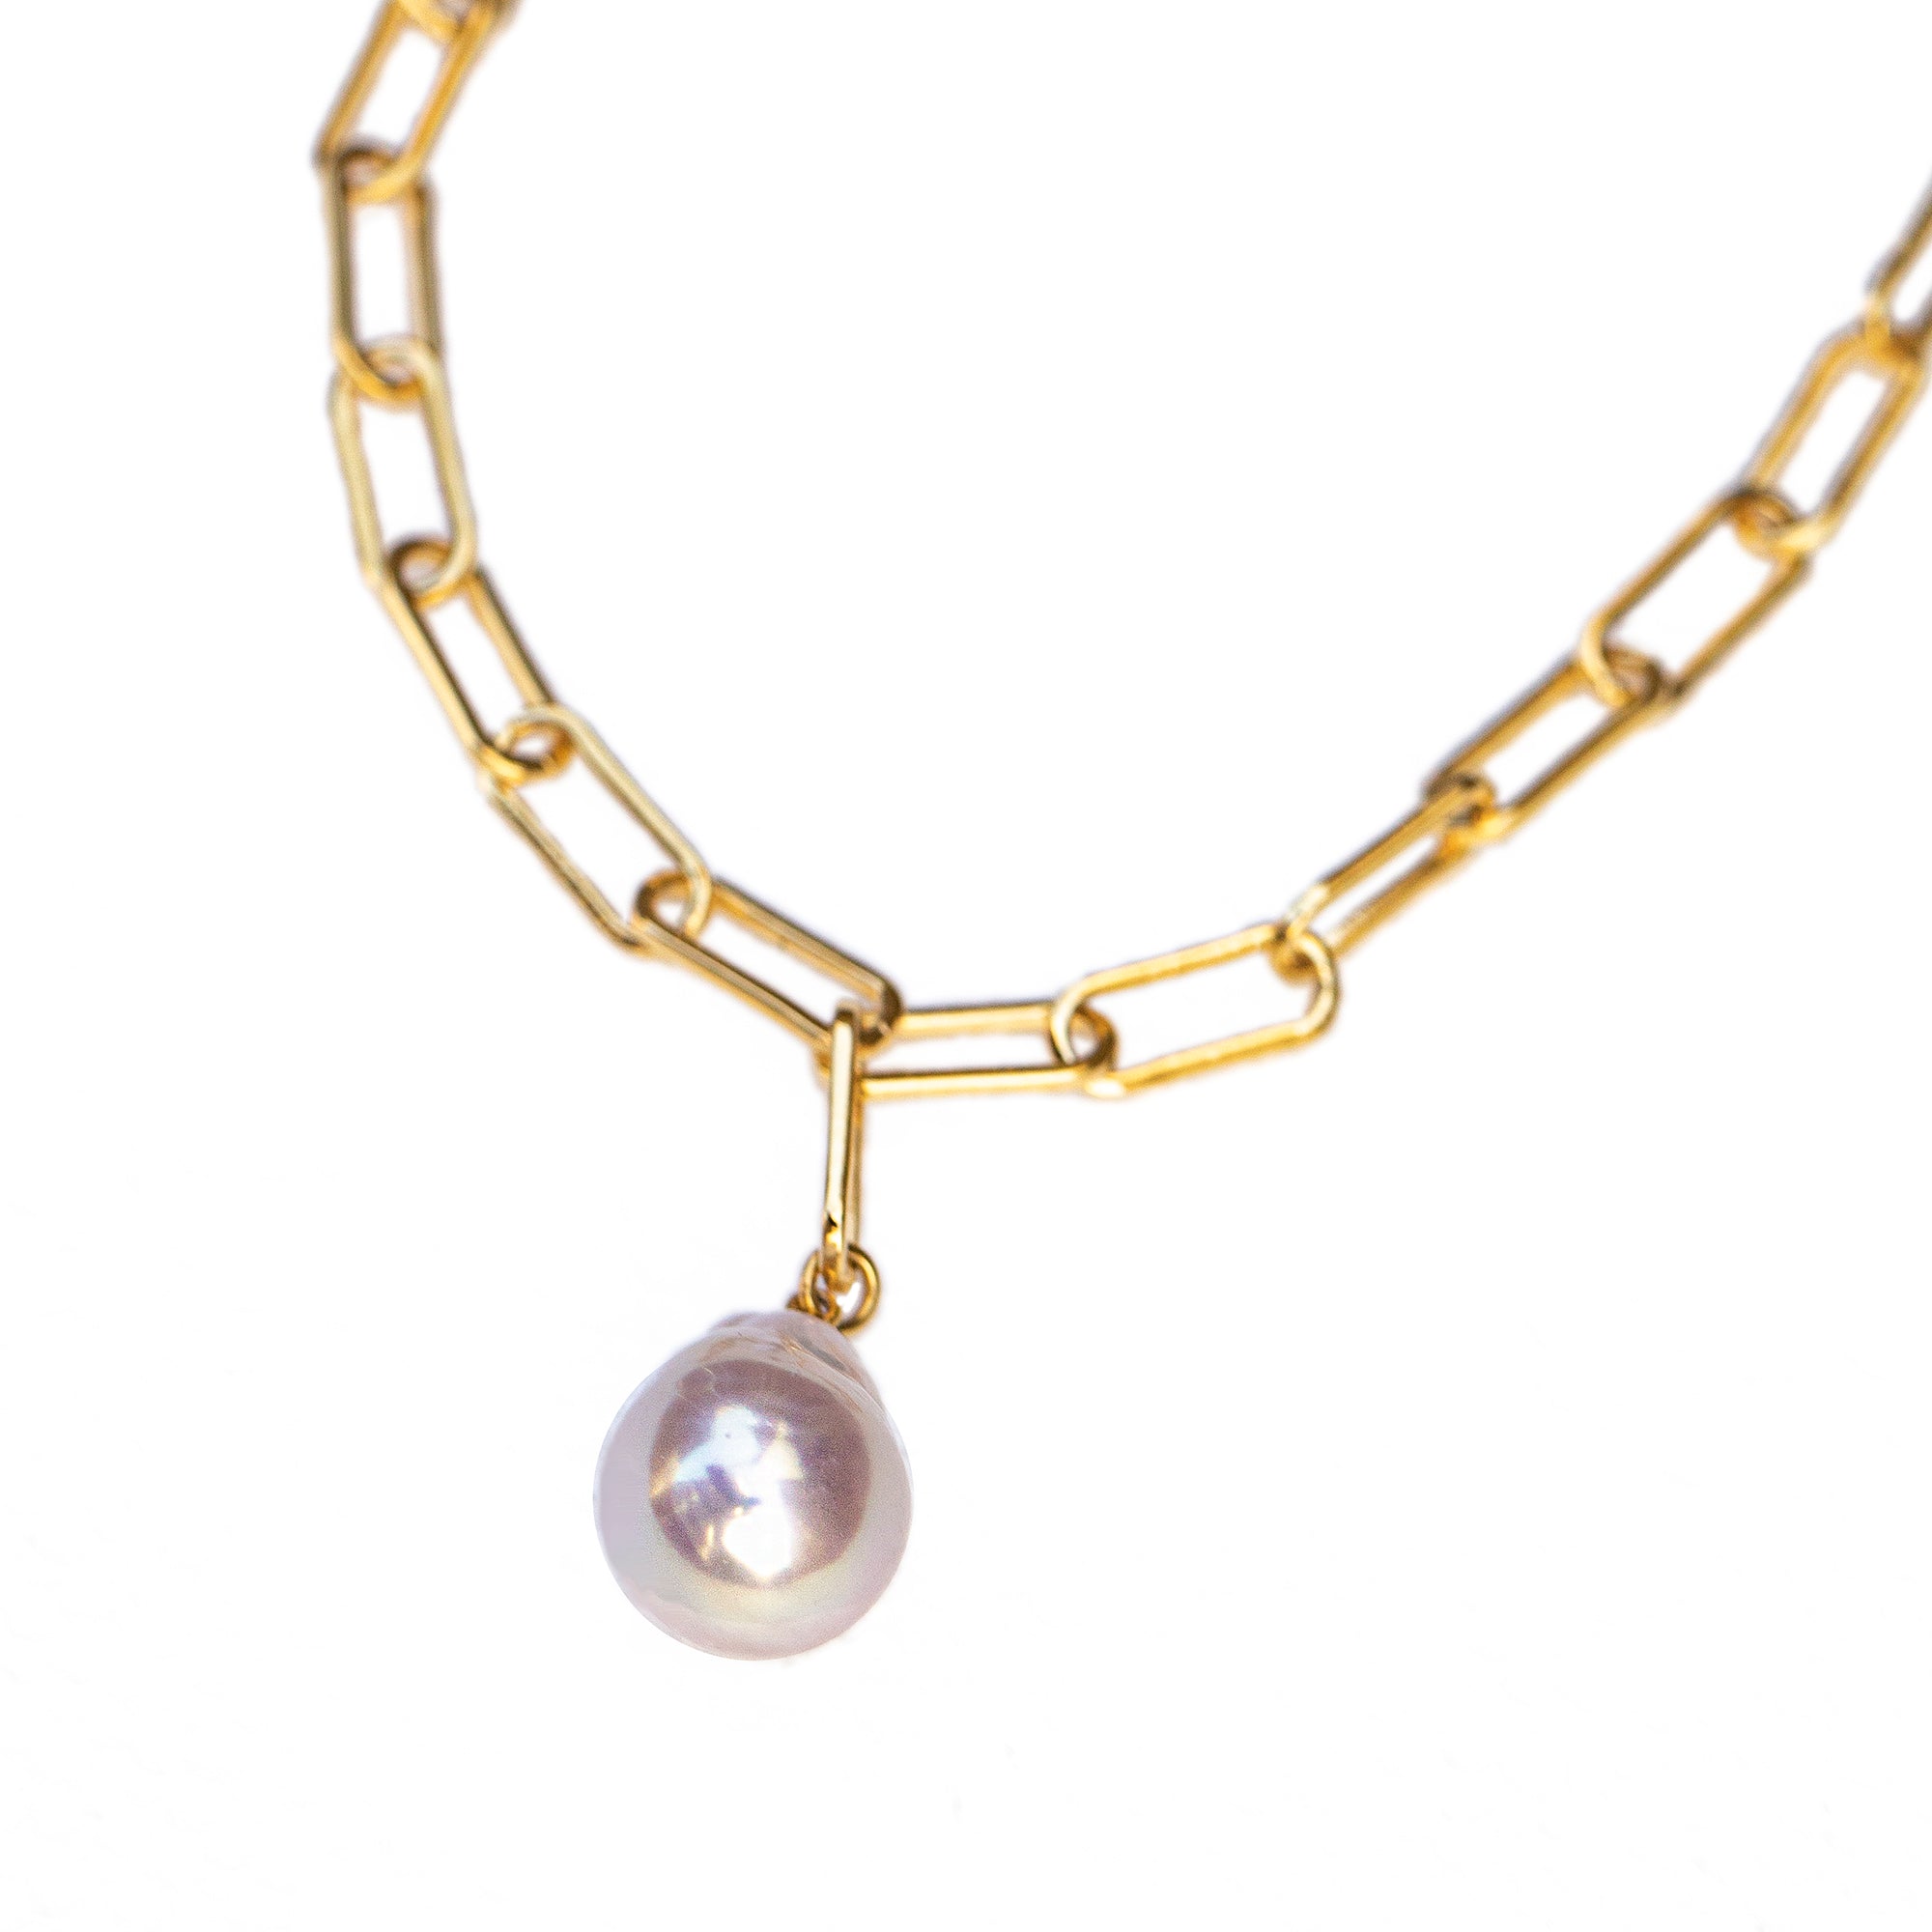 AMMANII Trio Charm Necklace with Freshwater Pearls in Vermeil Gold